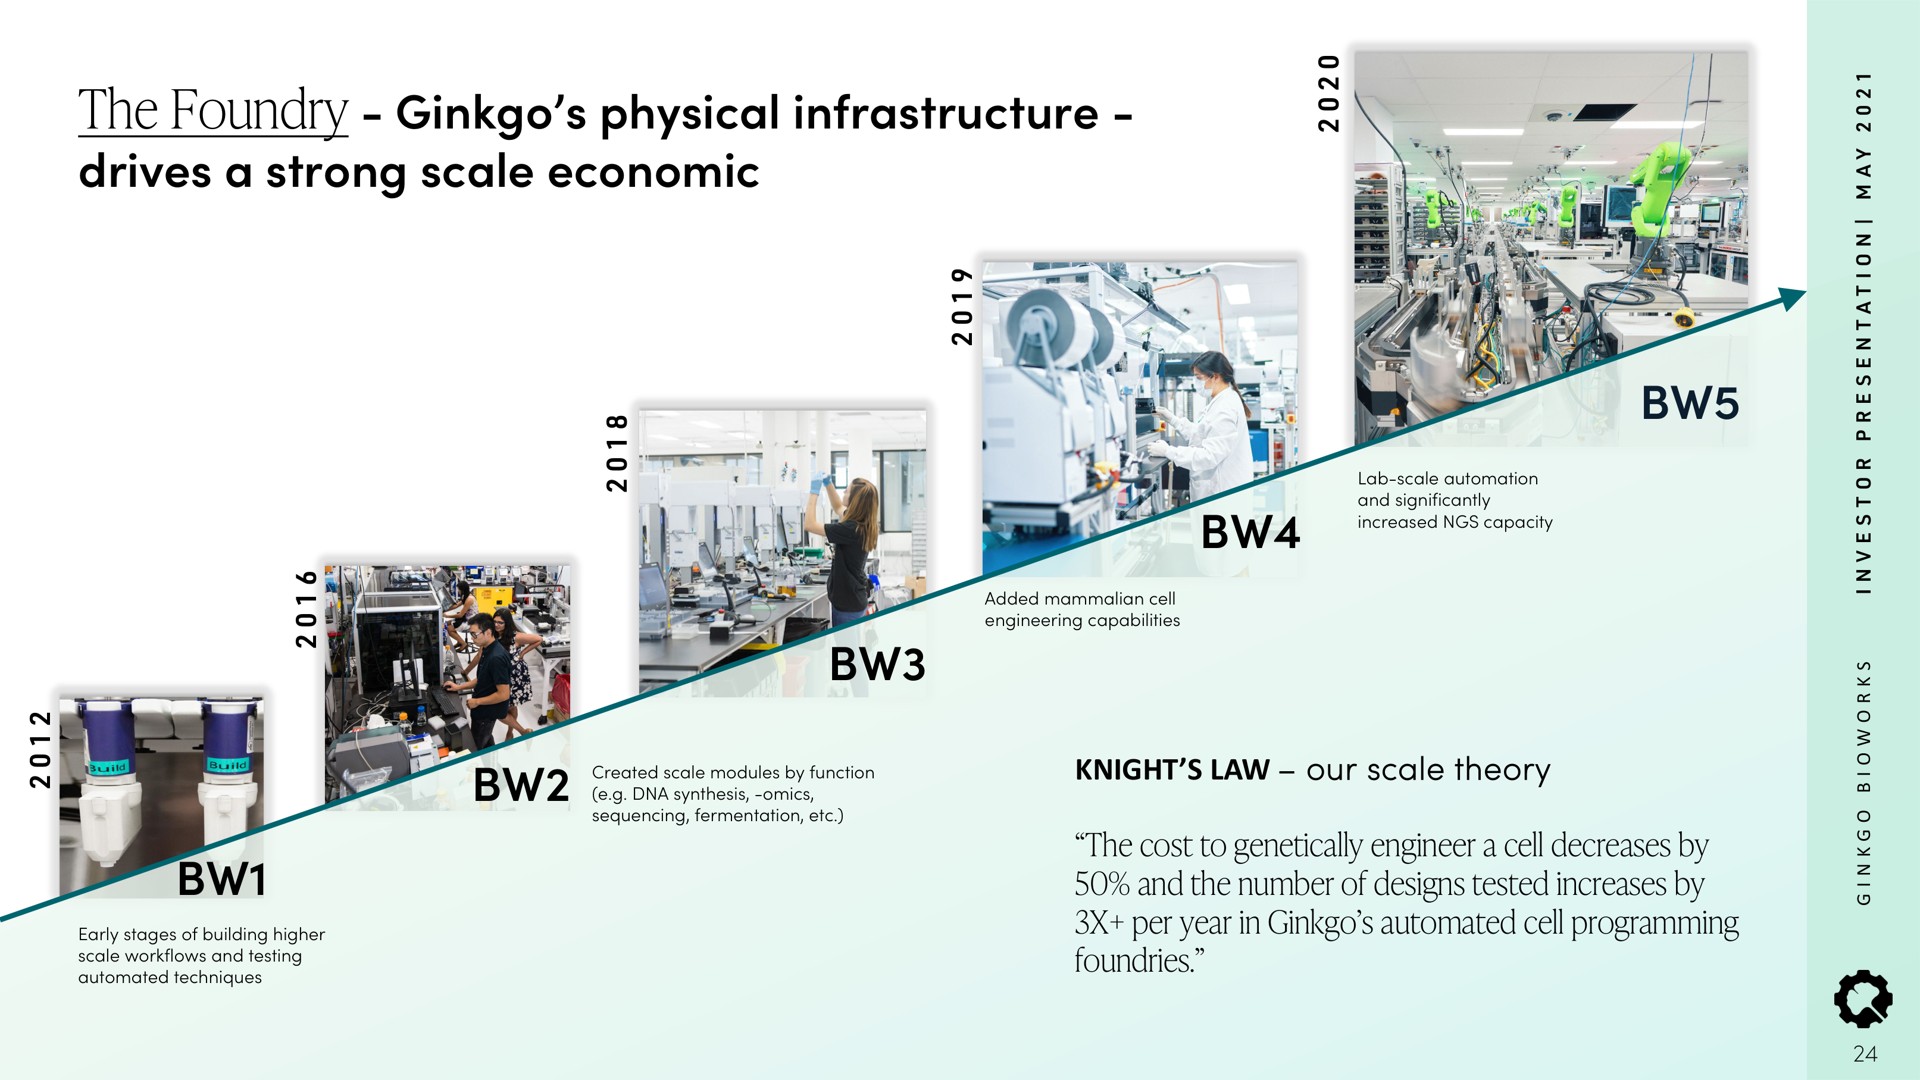 the foundry ginkgo physical infrastructure drives a strong scale economic | Ginkgo